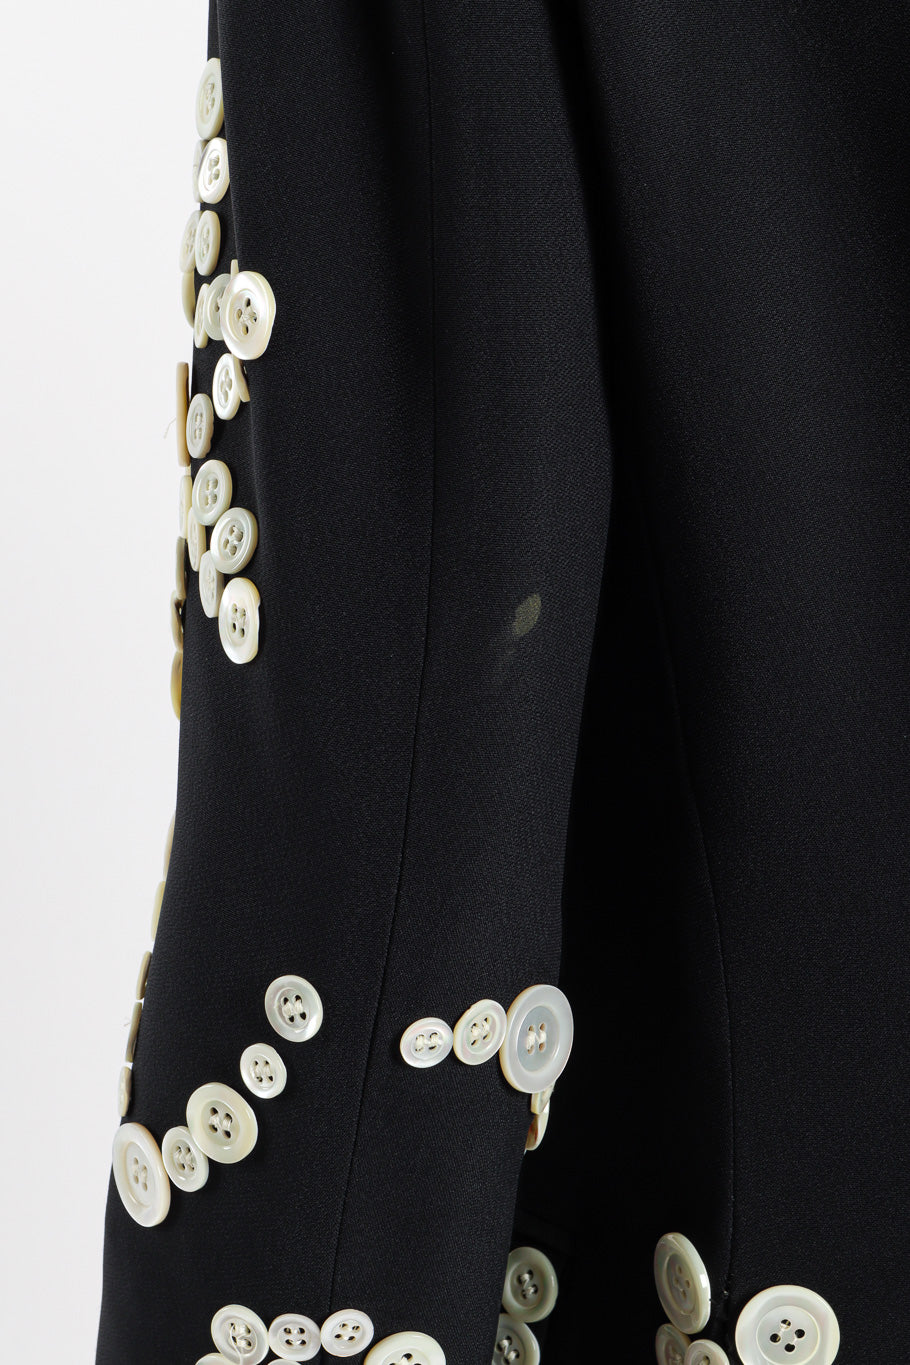 Vintage Moschino Mother of Pearl Button Blazer stain on left sleeve closeup @Recessla